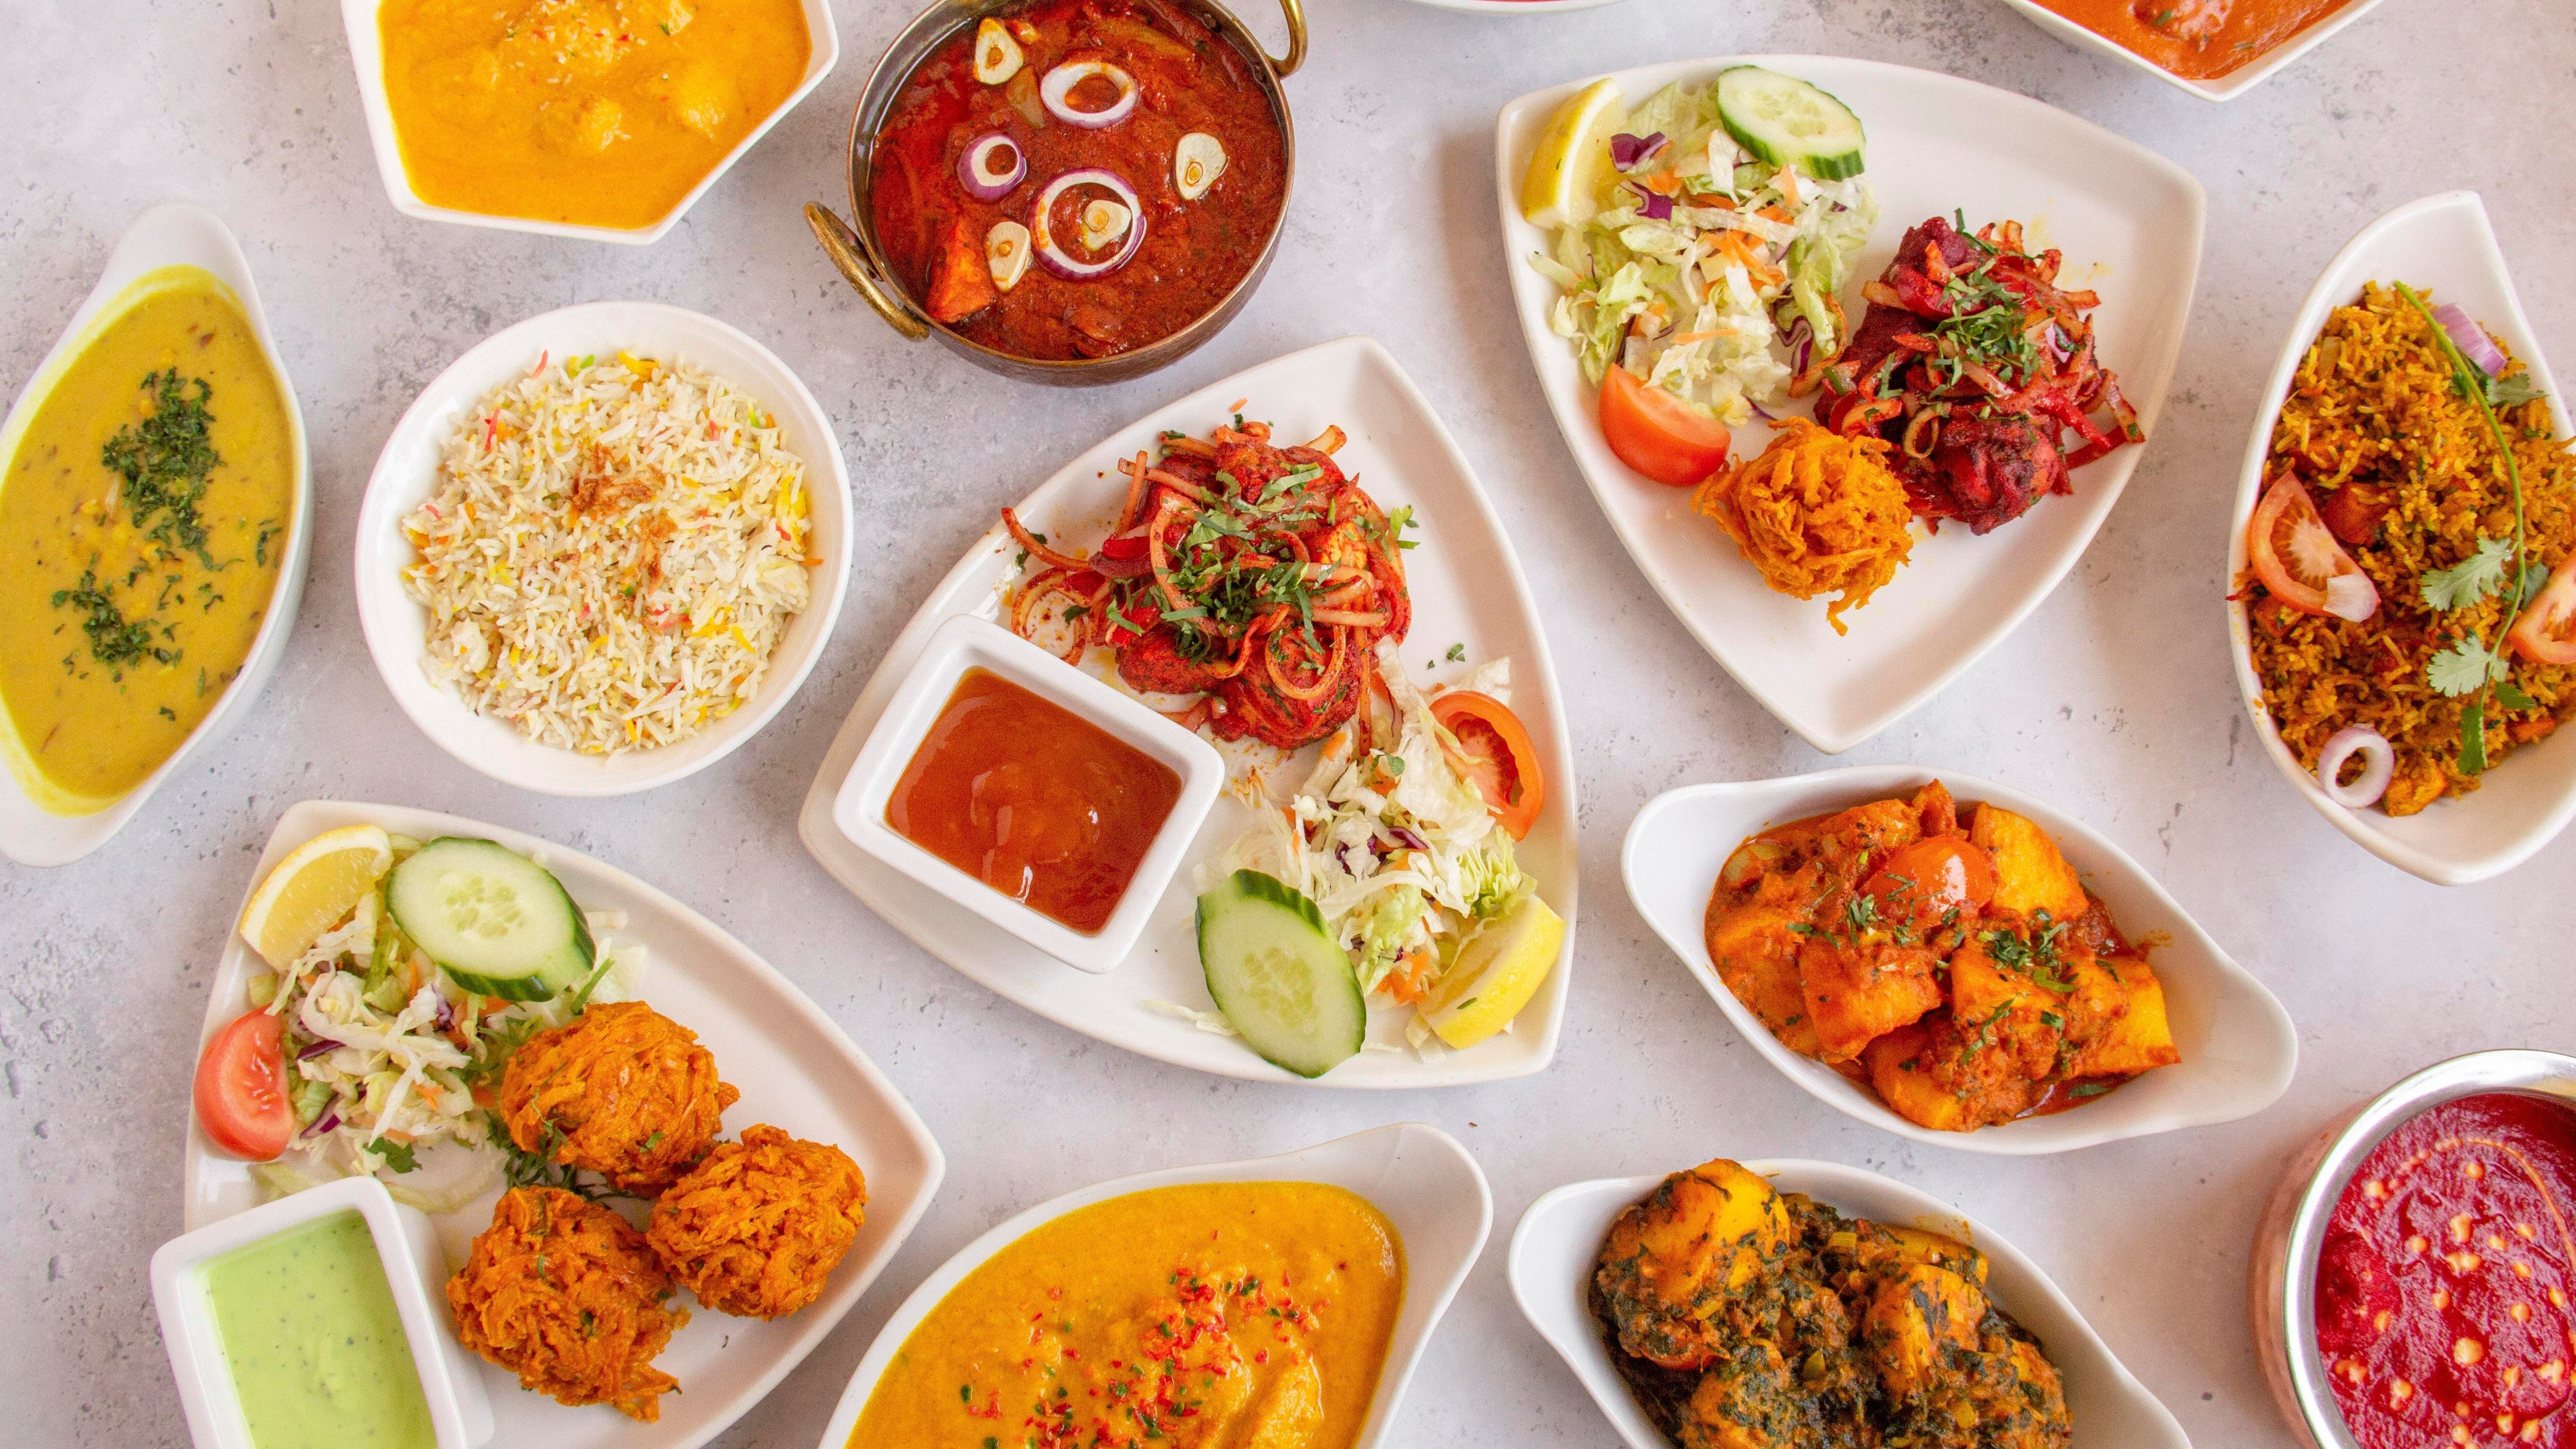 Indispices Takeaway